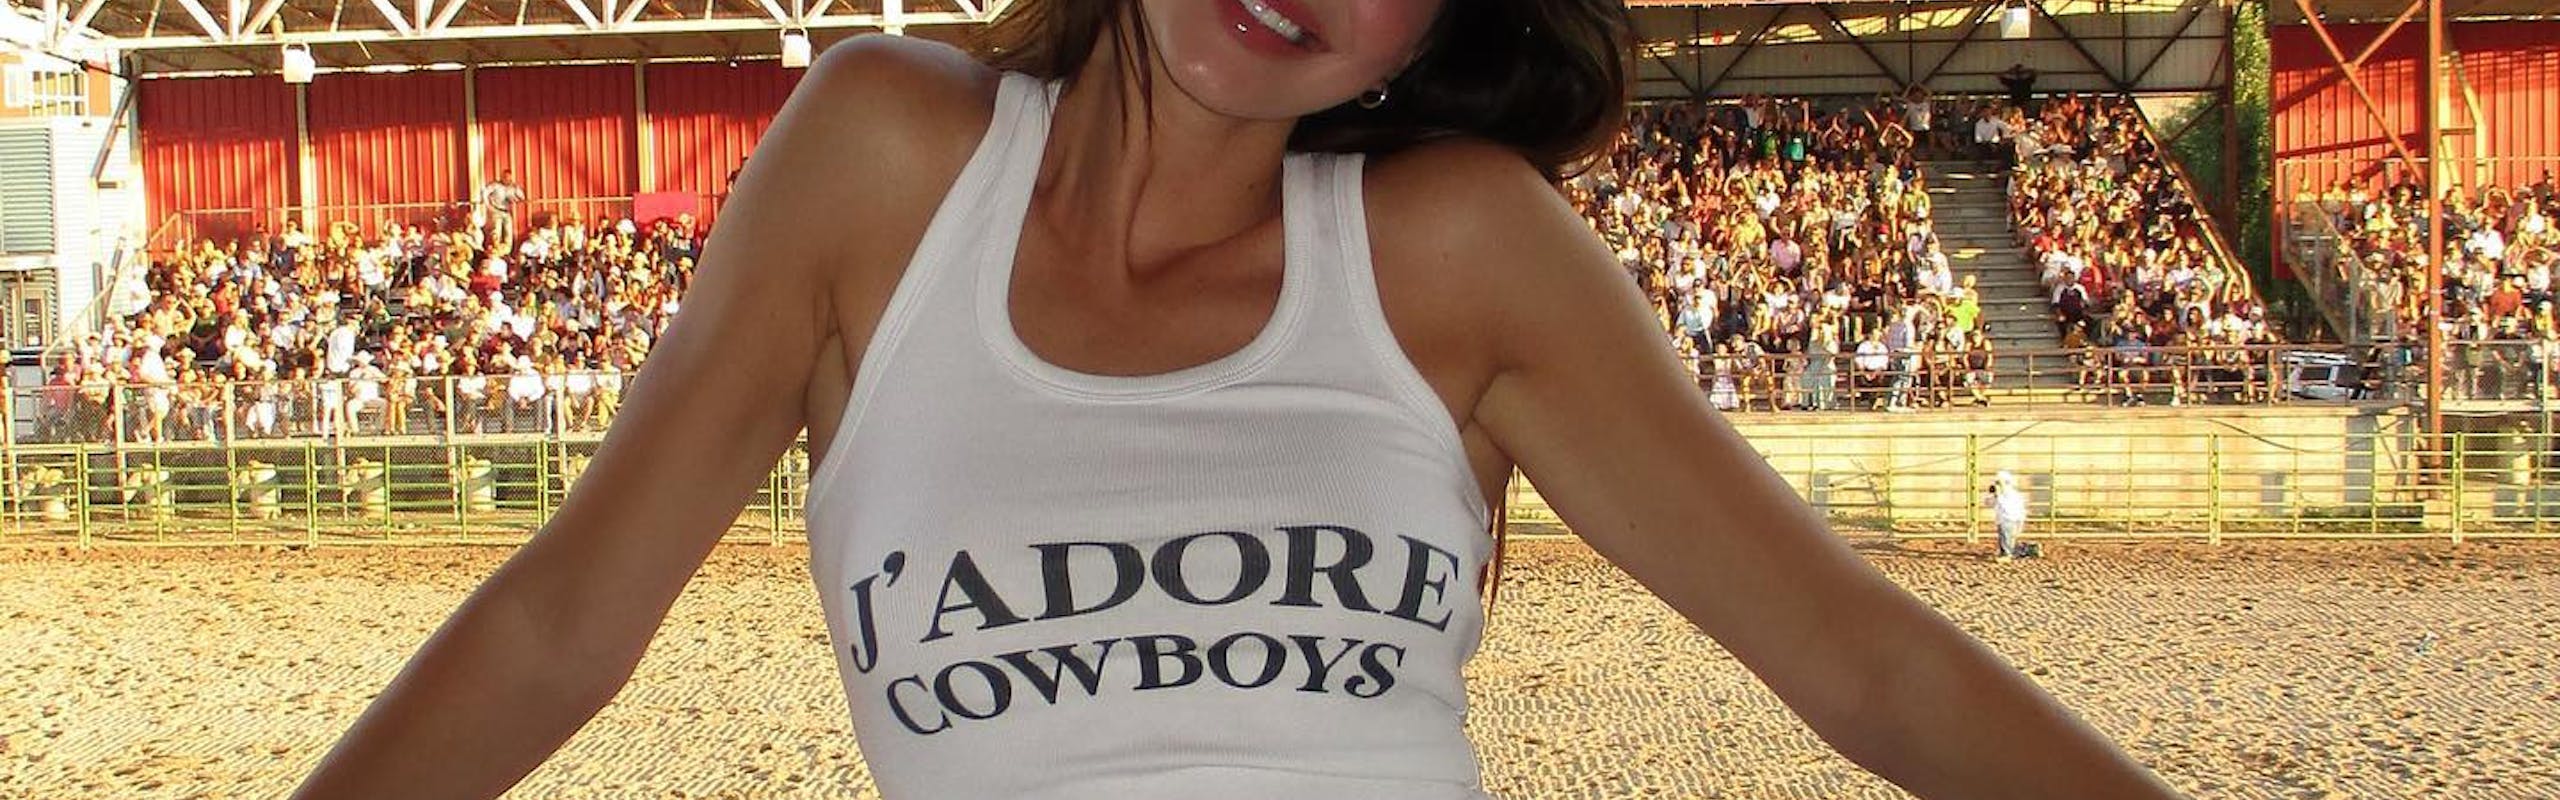 Kendall Jenner wearing a fitted tank top that says "J'Adore Cowbodys" and a denim mini skirt